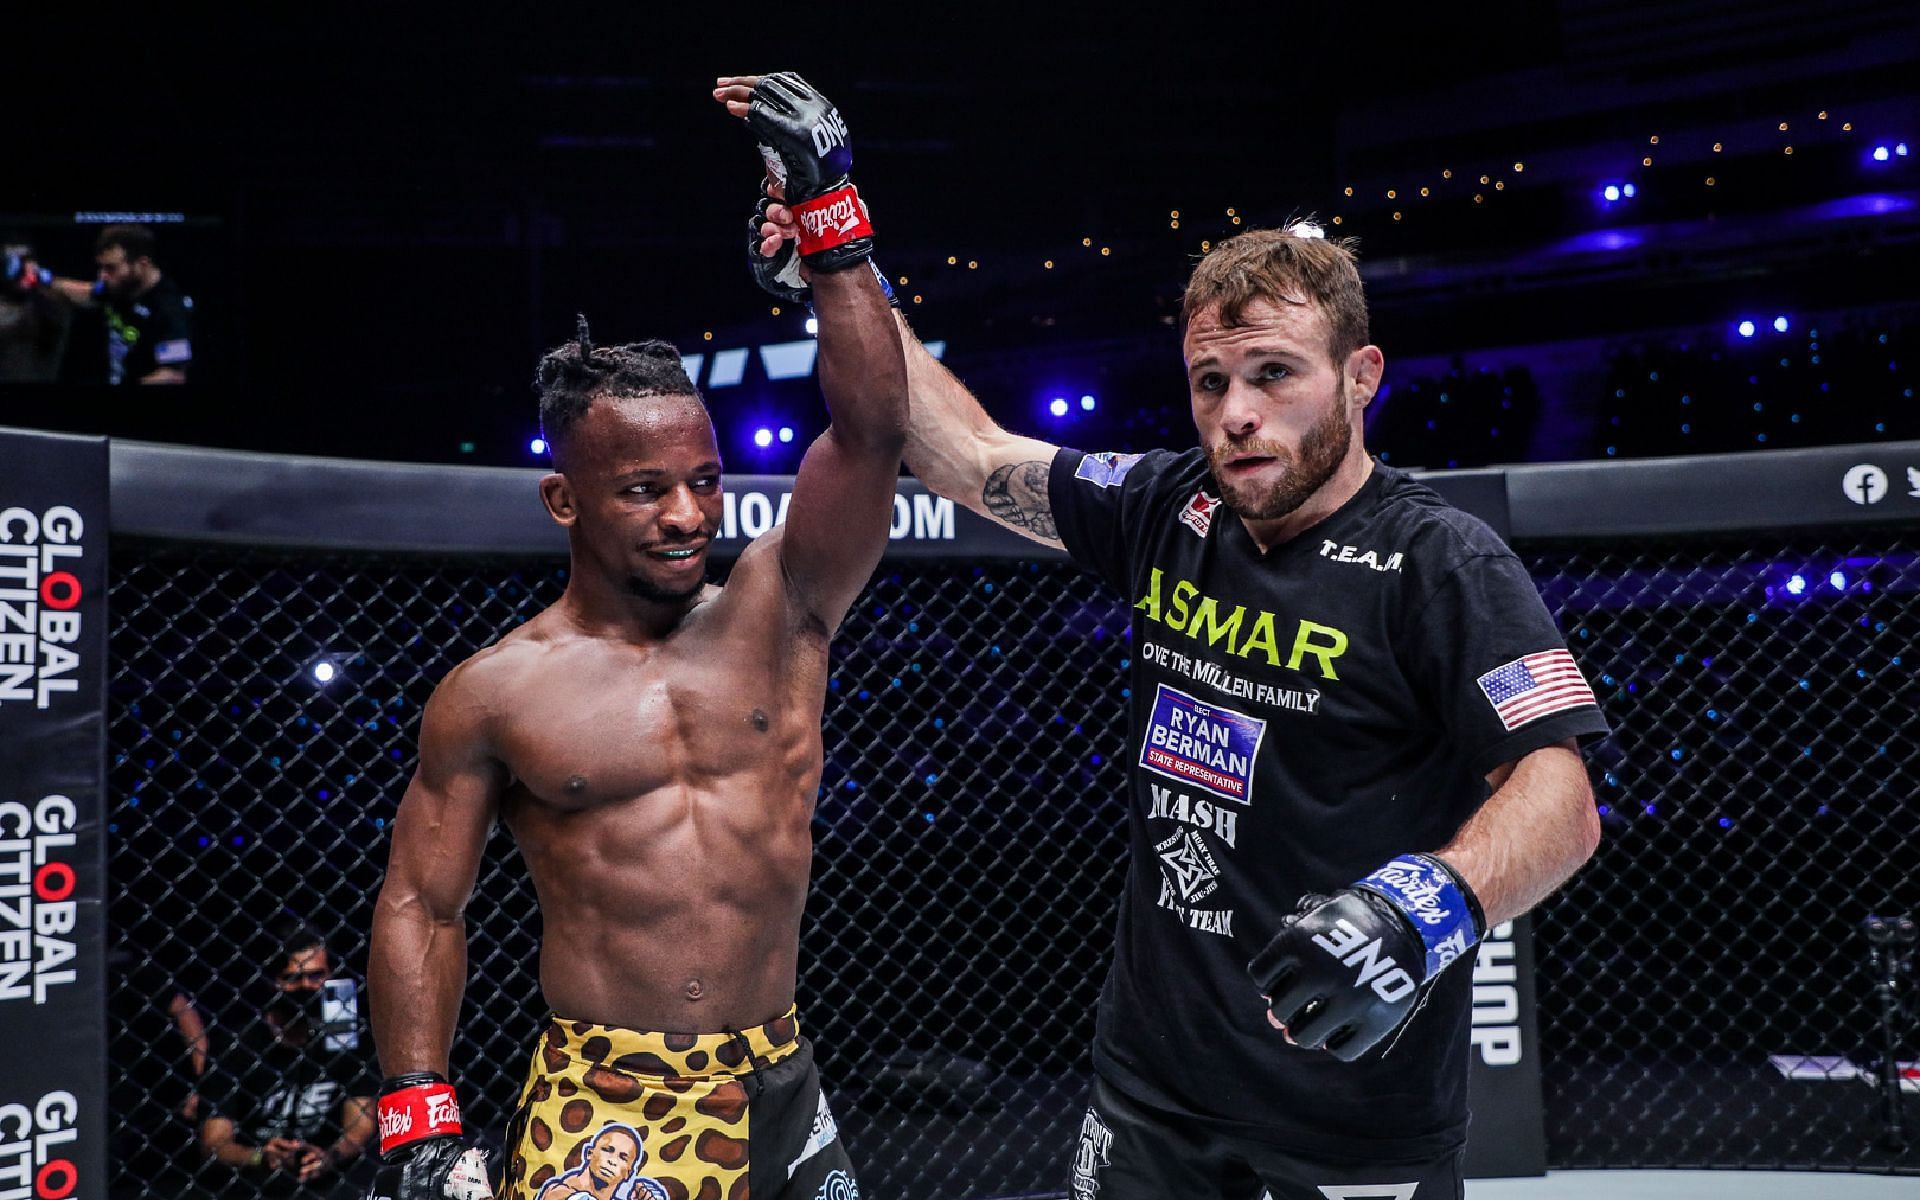 Jarred Brooks (right) celebrates his win together with his opponent Bokang Masunyane (left) after their title eliminator at ONE 156: Eersel vs. Sadikovic. [Photo ONE Championship]